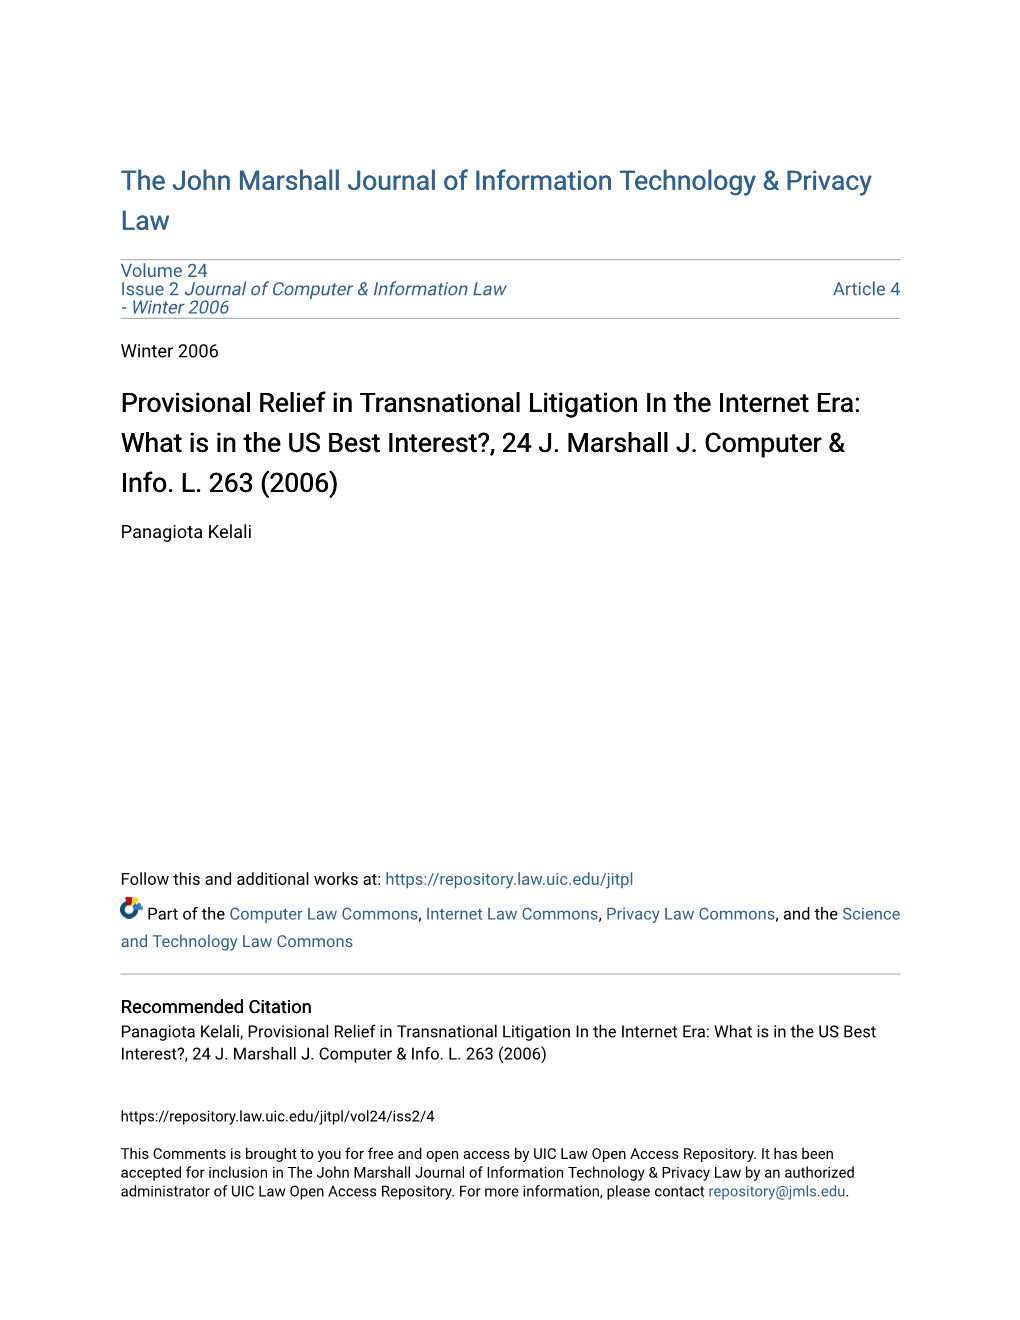 Provisional Relief in Transnational Litigation in the Internet Era: What Is in the US Best Interest?, 24 J